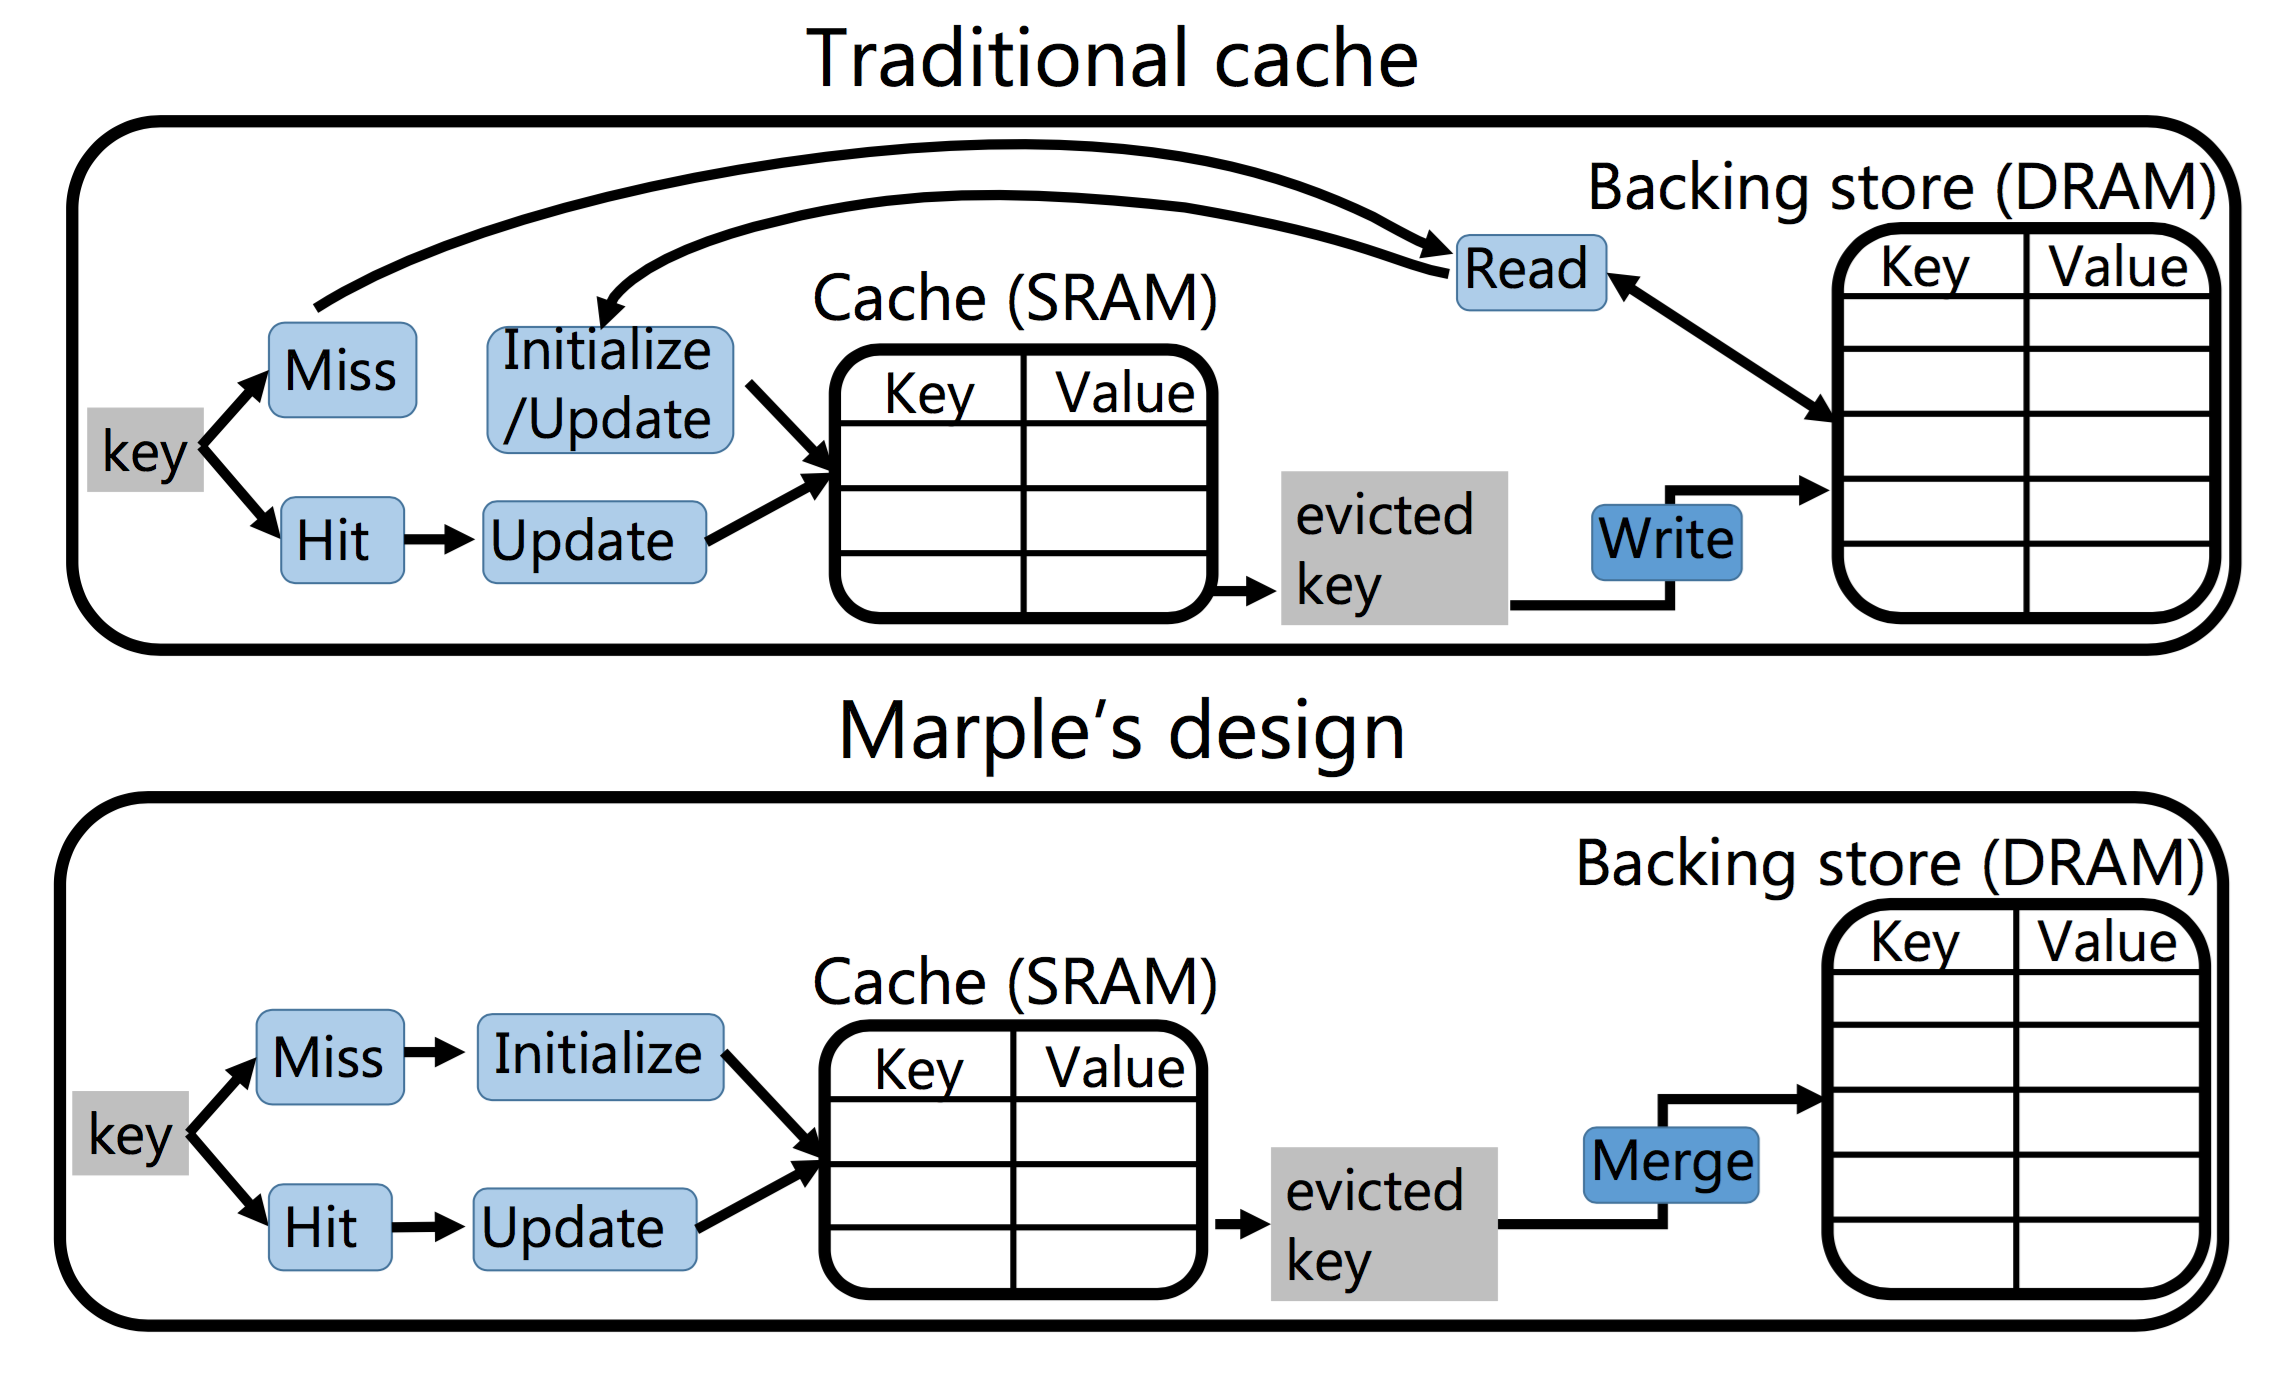 Difference between a traditional cache and Marple's cache